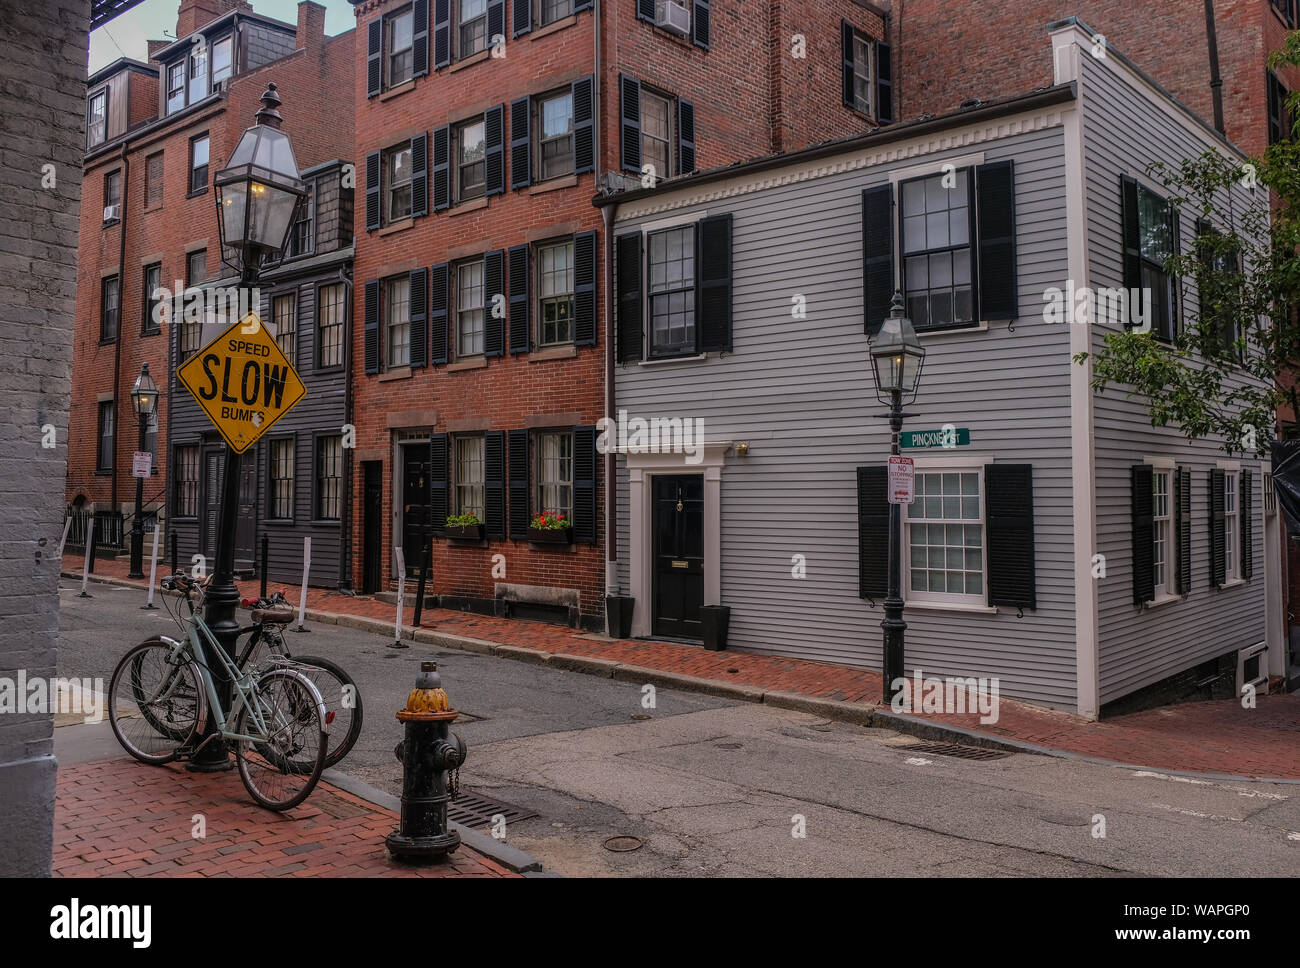 Acorn Street in Beacon Hill district, Boston, Massachusetts, USA - July 28, 2018: Two bicycles resting on a lamppost on a street in Beacon Hill, Bosto Stock Photo